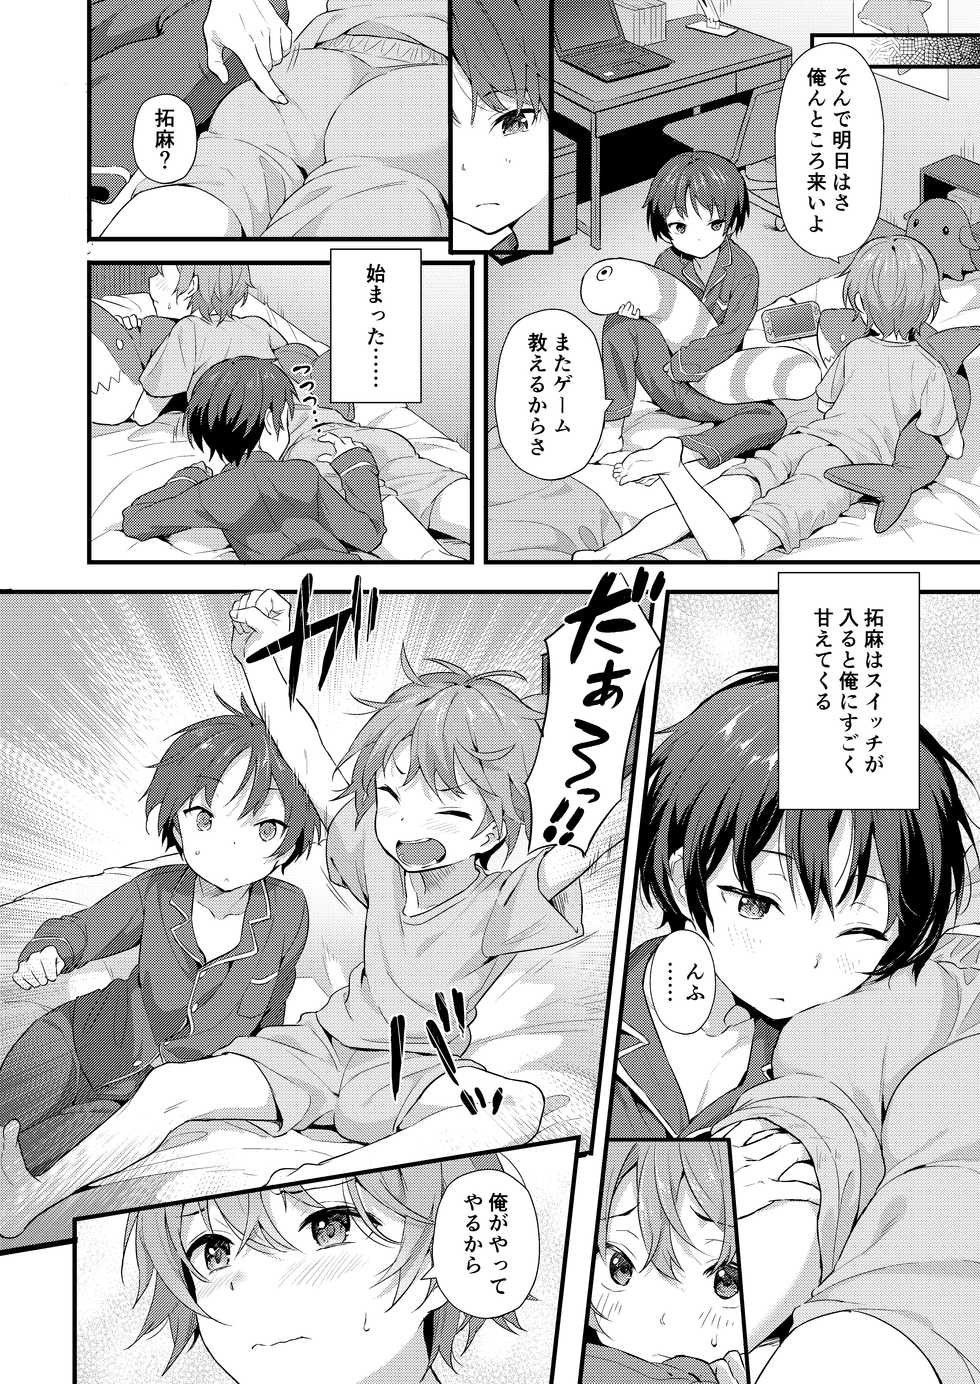 [Commamion, Pfactory (Various)] Shota Sextet 1 [Digital] - Page 9